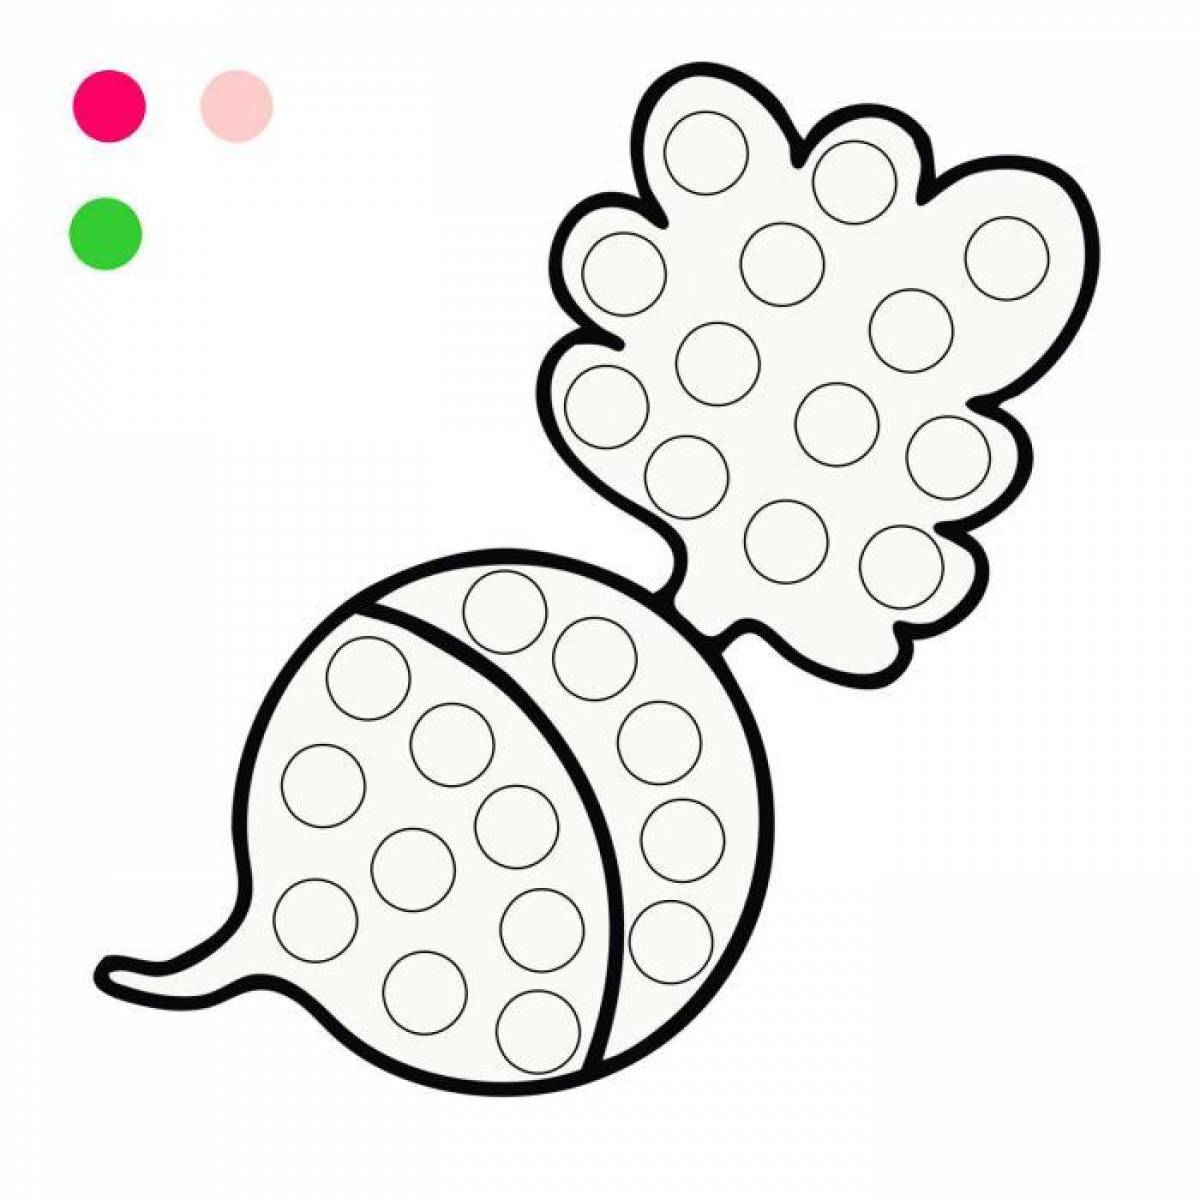 Coloring pages for fingers radish